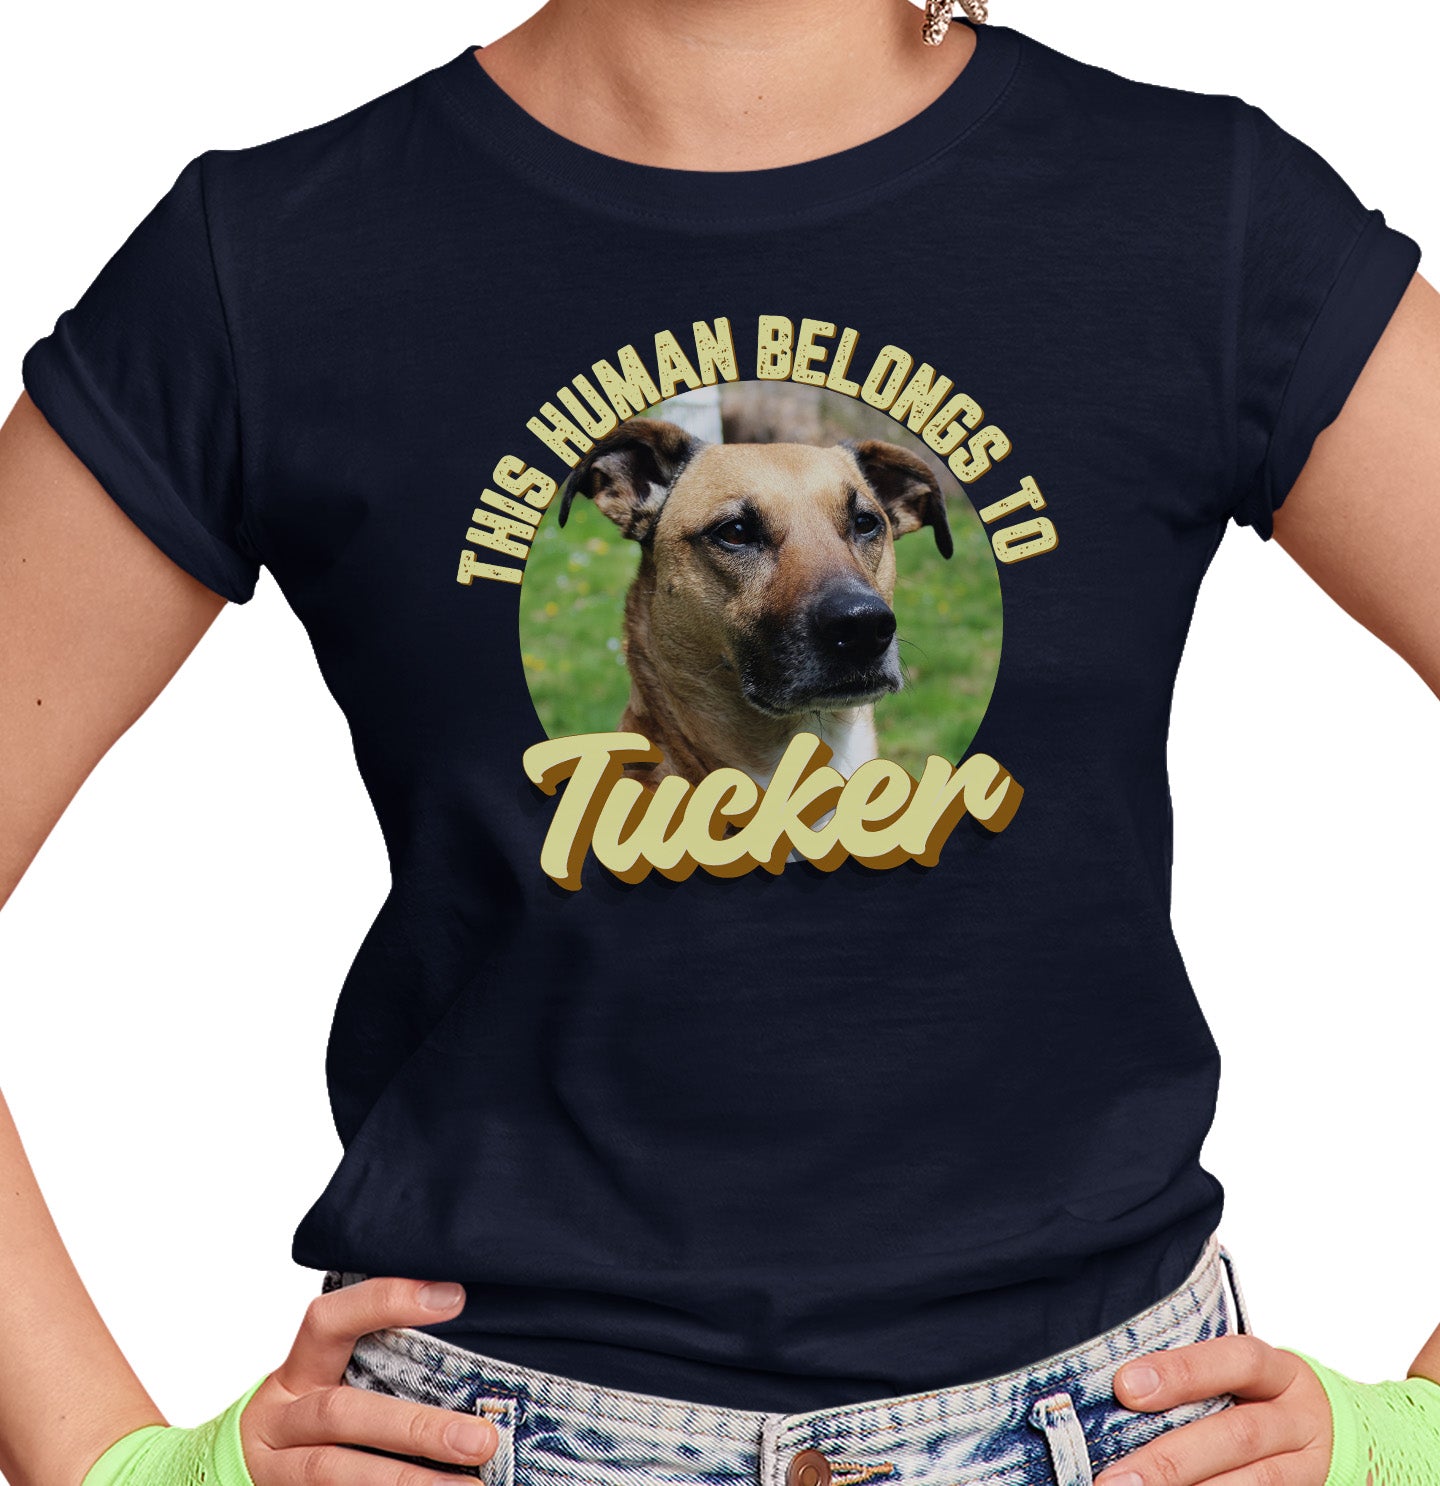 This Human Belongs To - Personalized Custom Women's Fitted T-Shirt